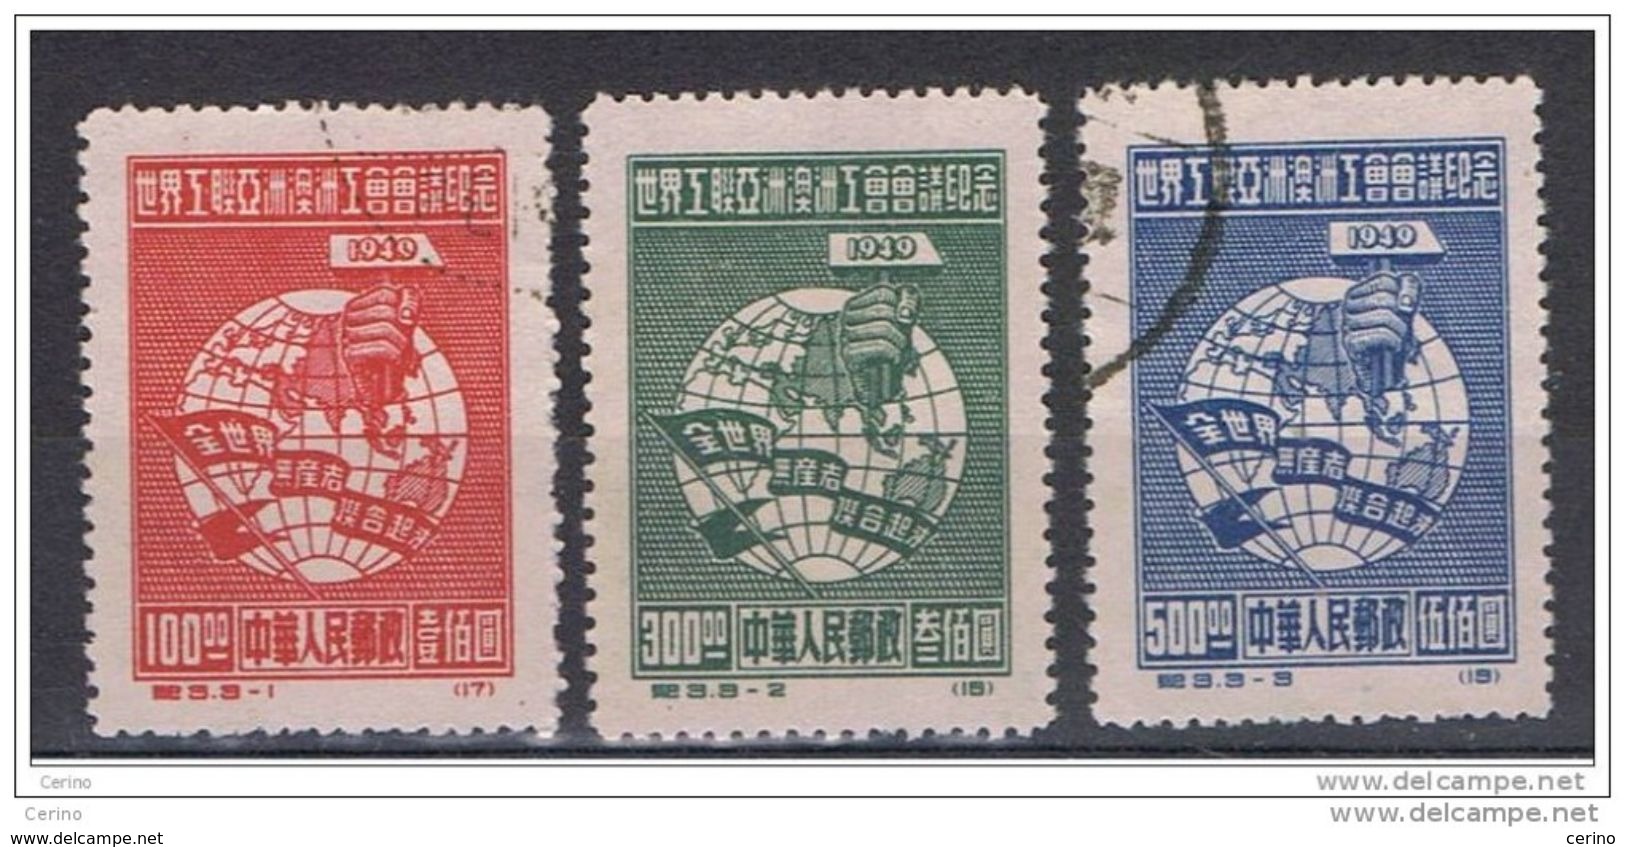 CINA:  1949  CONGRESSO  -  S. CPL. 3  VAL. US. -  RISTAMPE  -  YV/TELL. 824/26 - Official Reprints